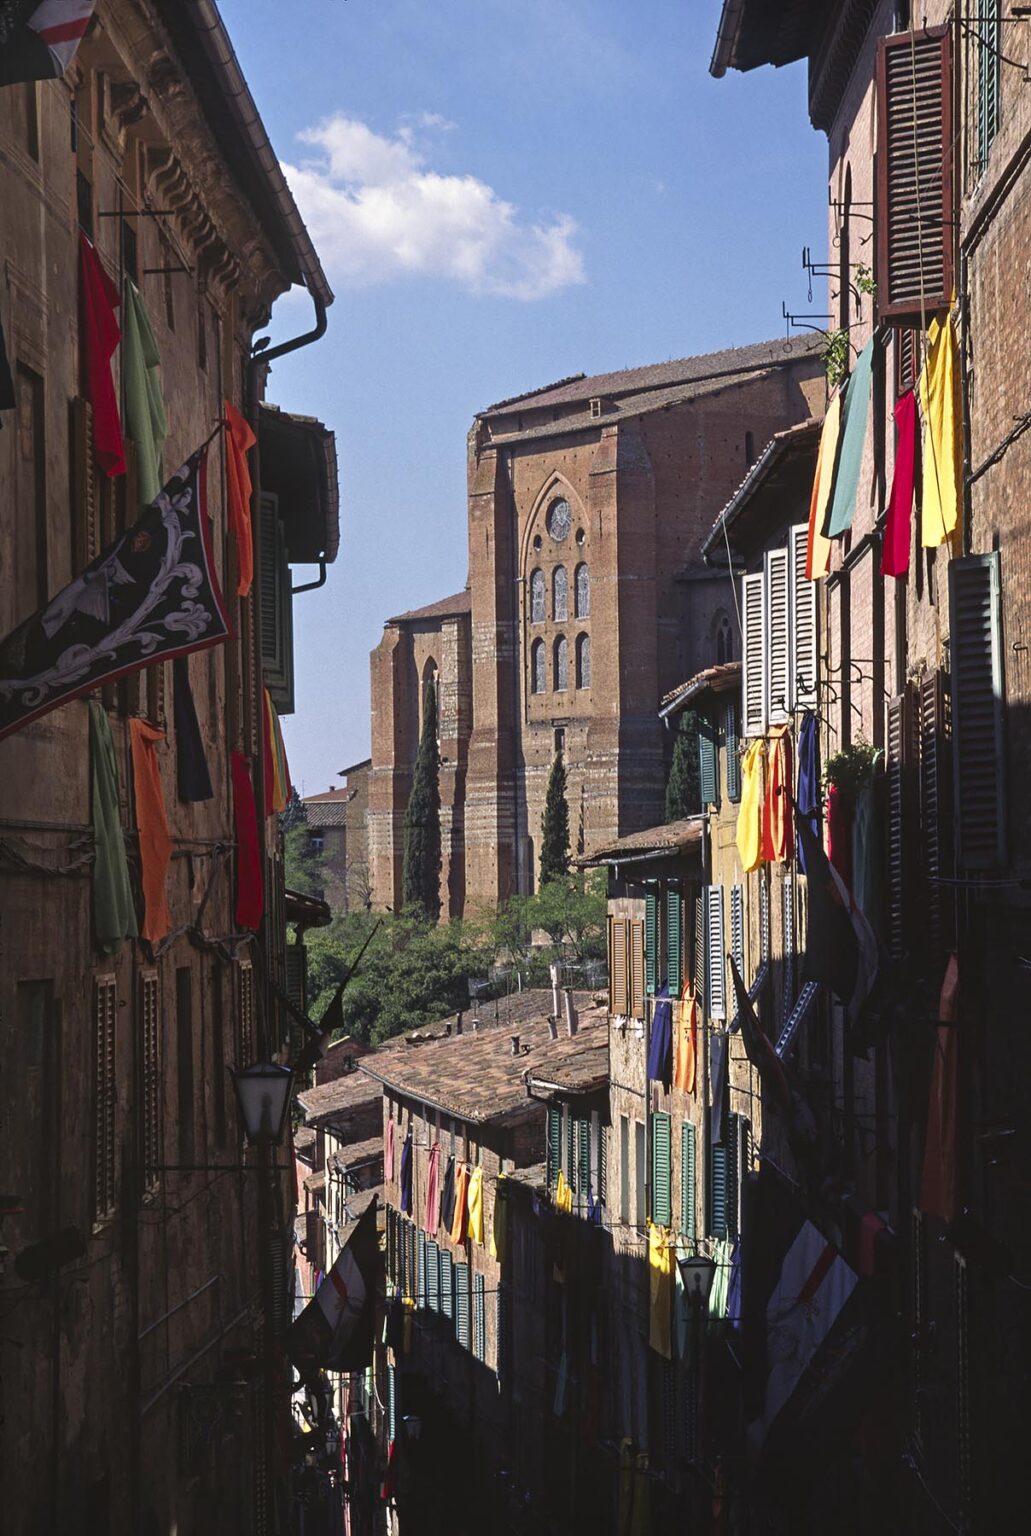 Flags decorate the buildings of Siena in preparation for a local festival - TUSCANY, ITALY